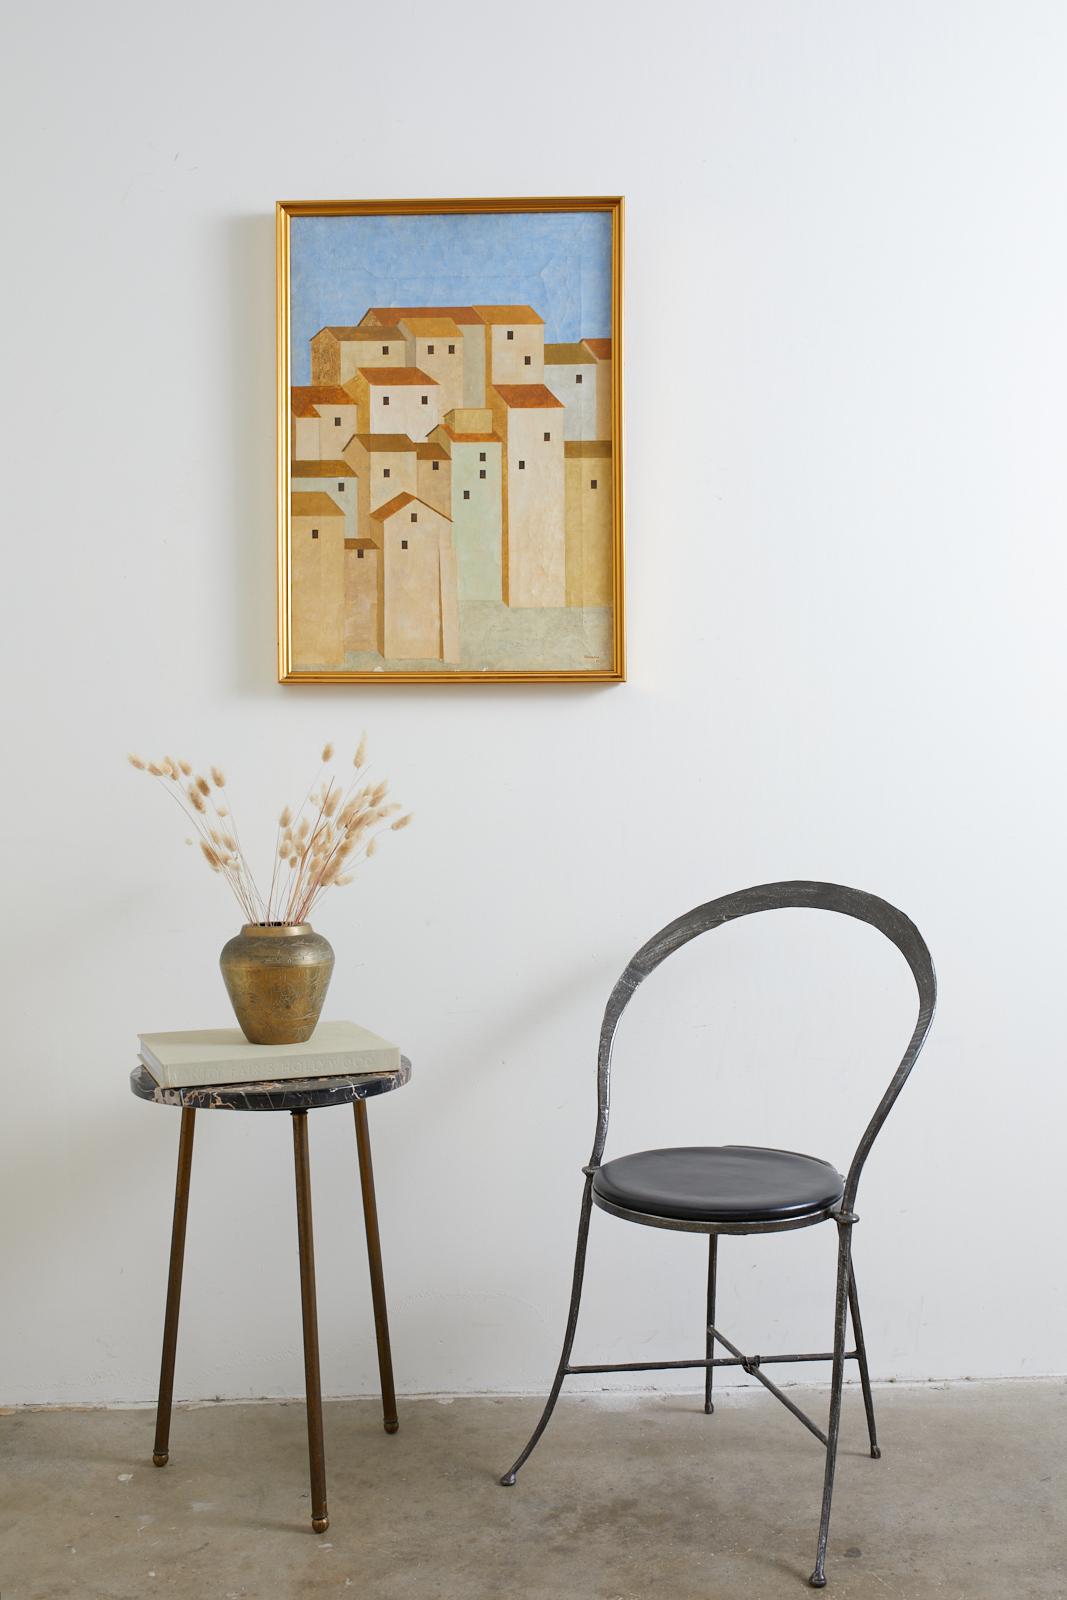 Mid-century modern acrylic on canvas painting depicting abstract geometric building landscape in the Cubism style. The 20th century style is represented in architectural building design using three dimensional forms. Signed and dated by artist